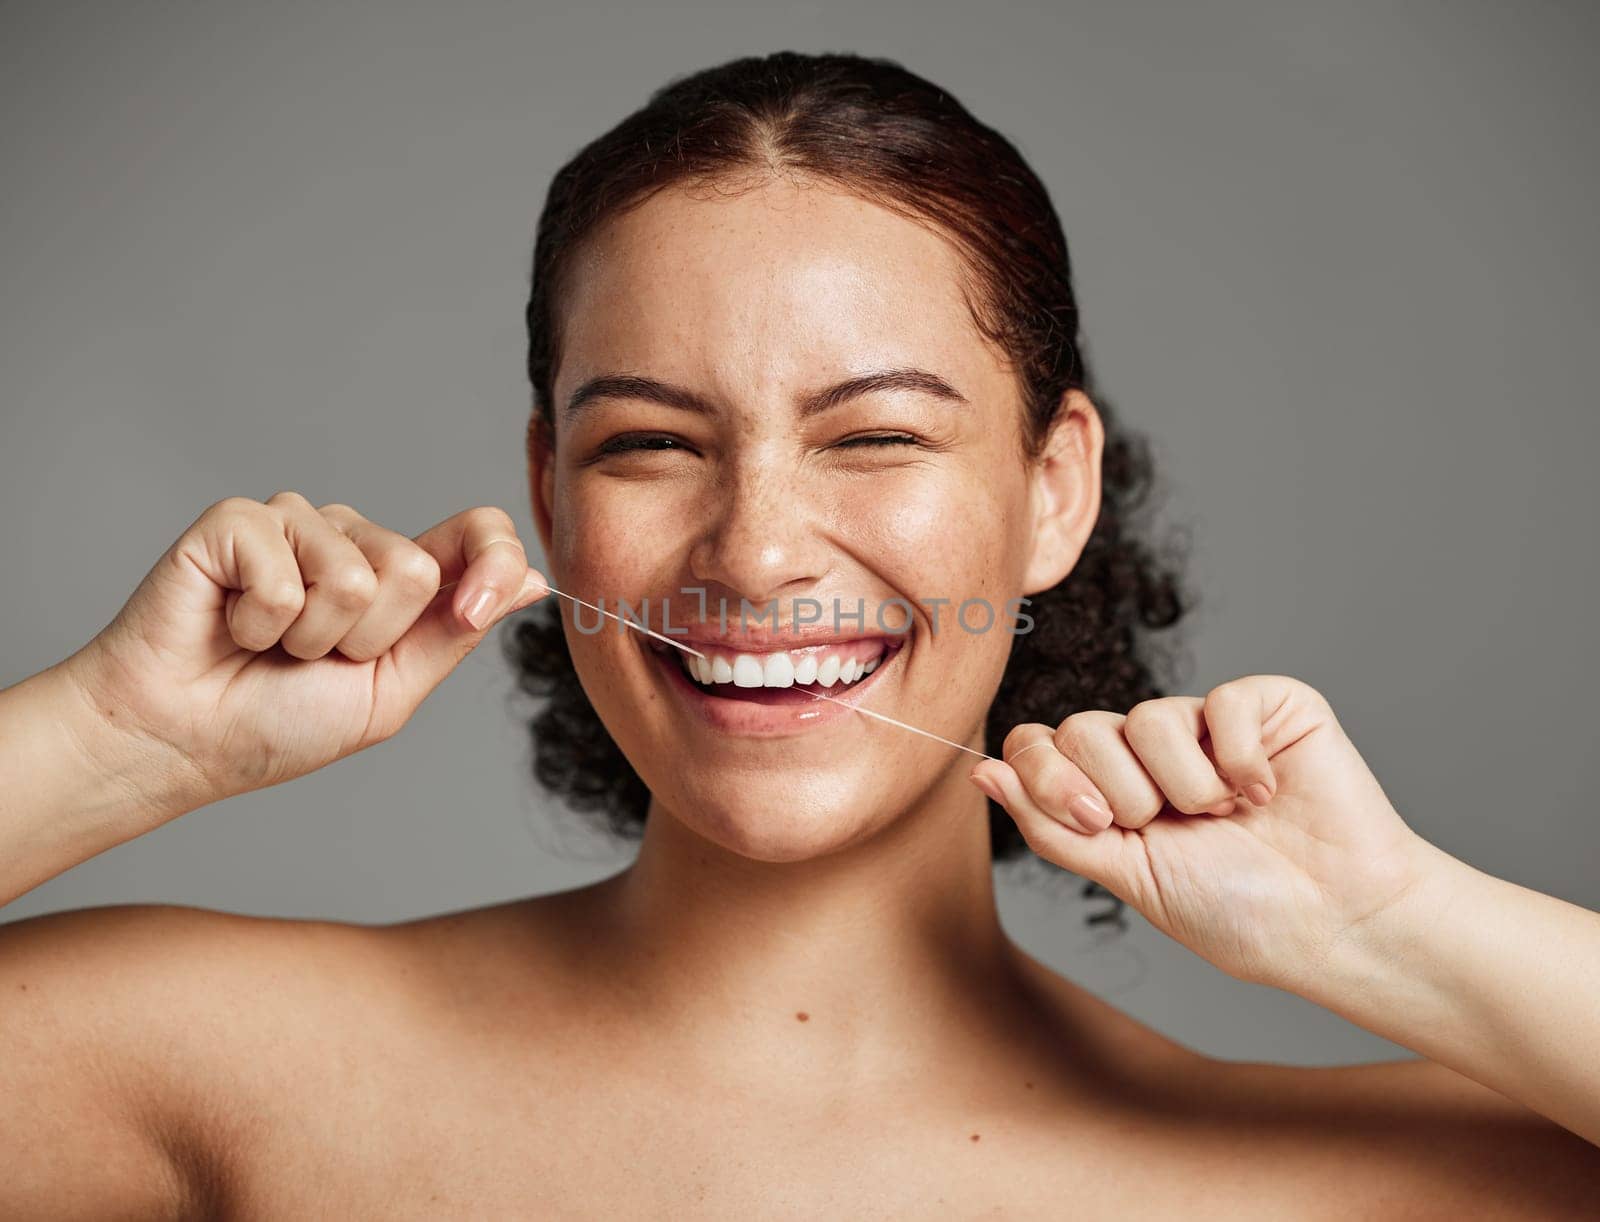 Dental floss, flossing teeth and woman with a smile for oral hygiene, health and wellness on studio background. Face of a happy female during self care, healthcare and grooming for a healthy mouth.